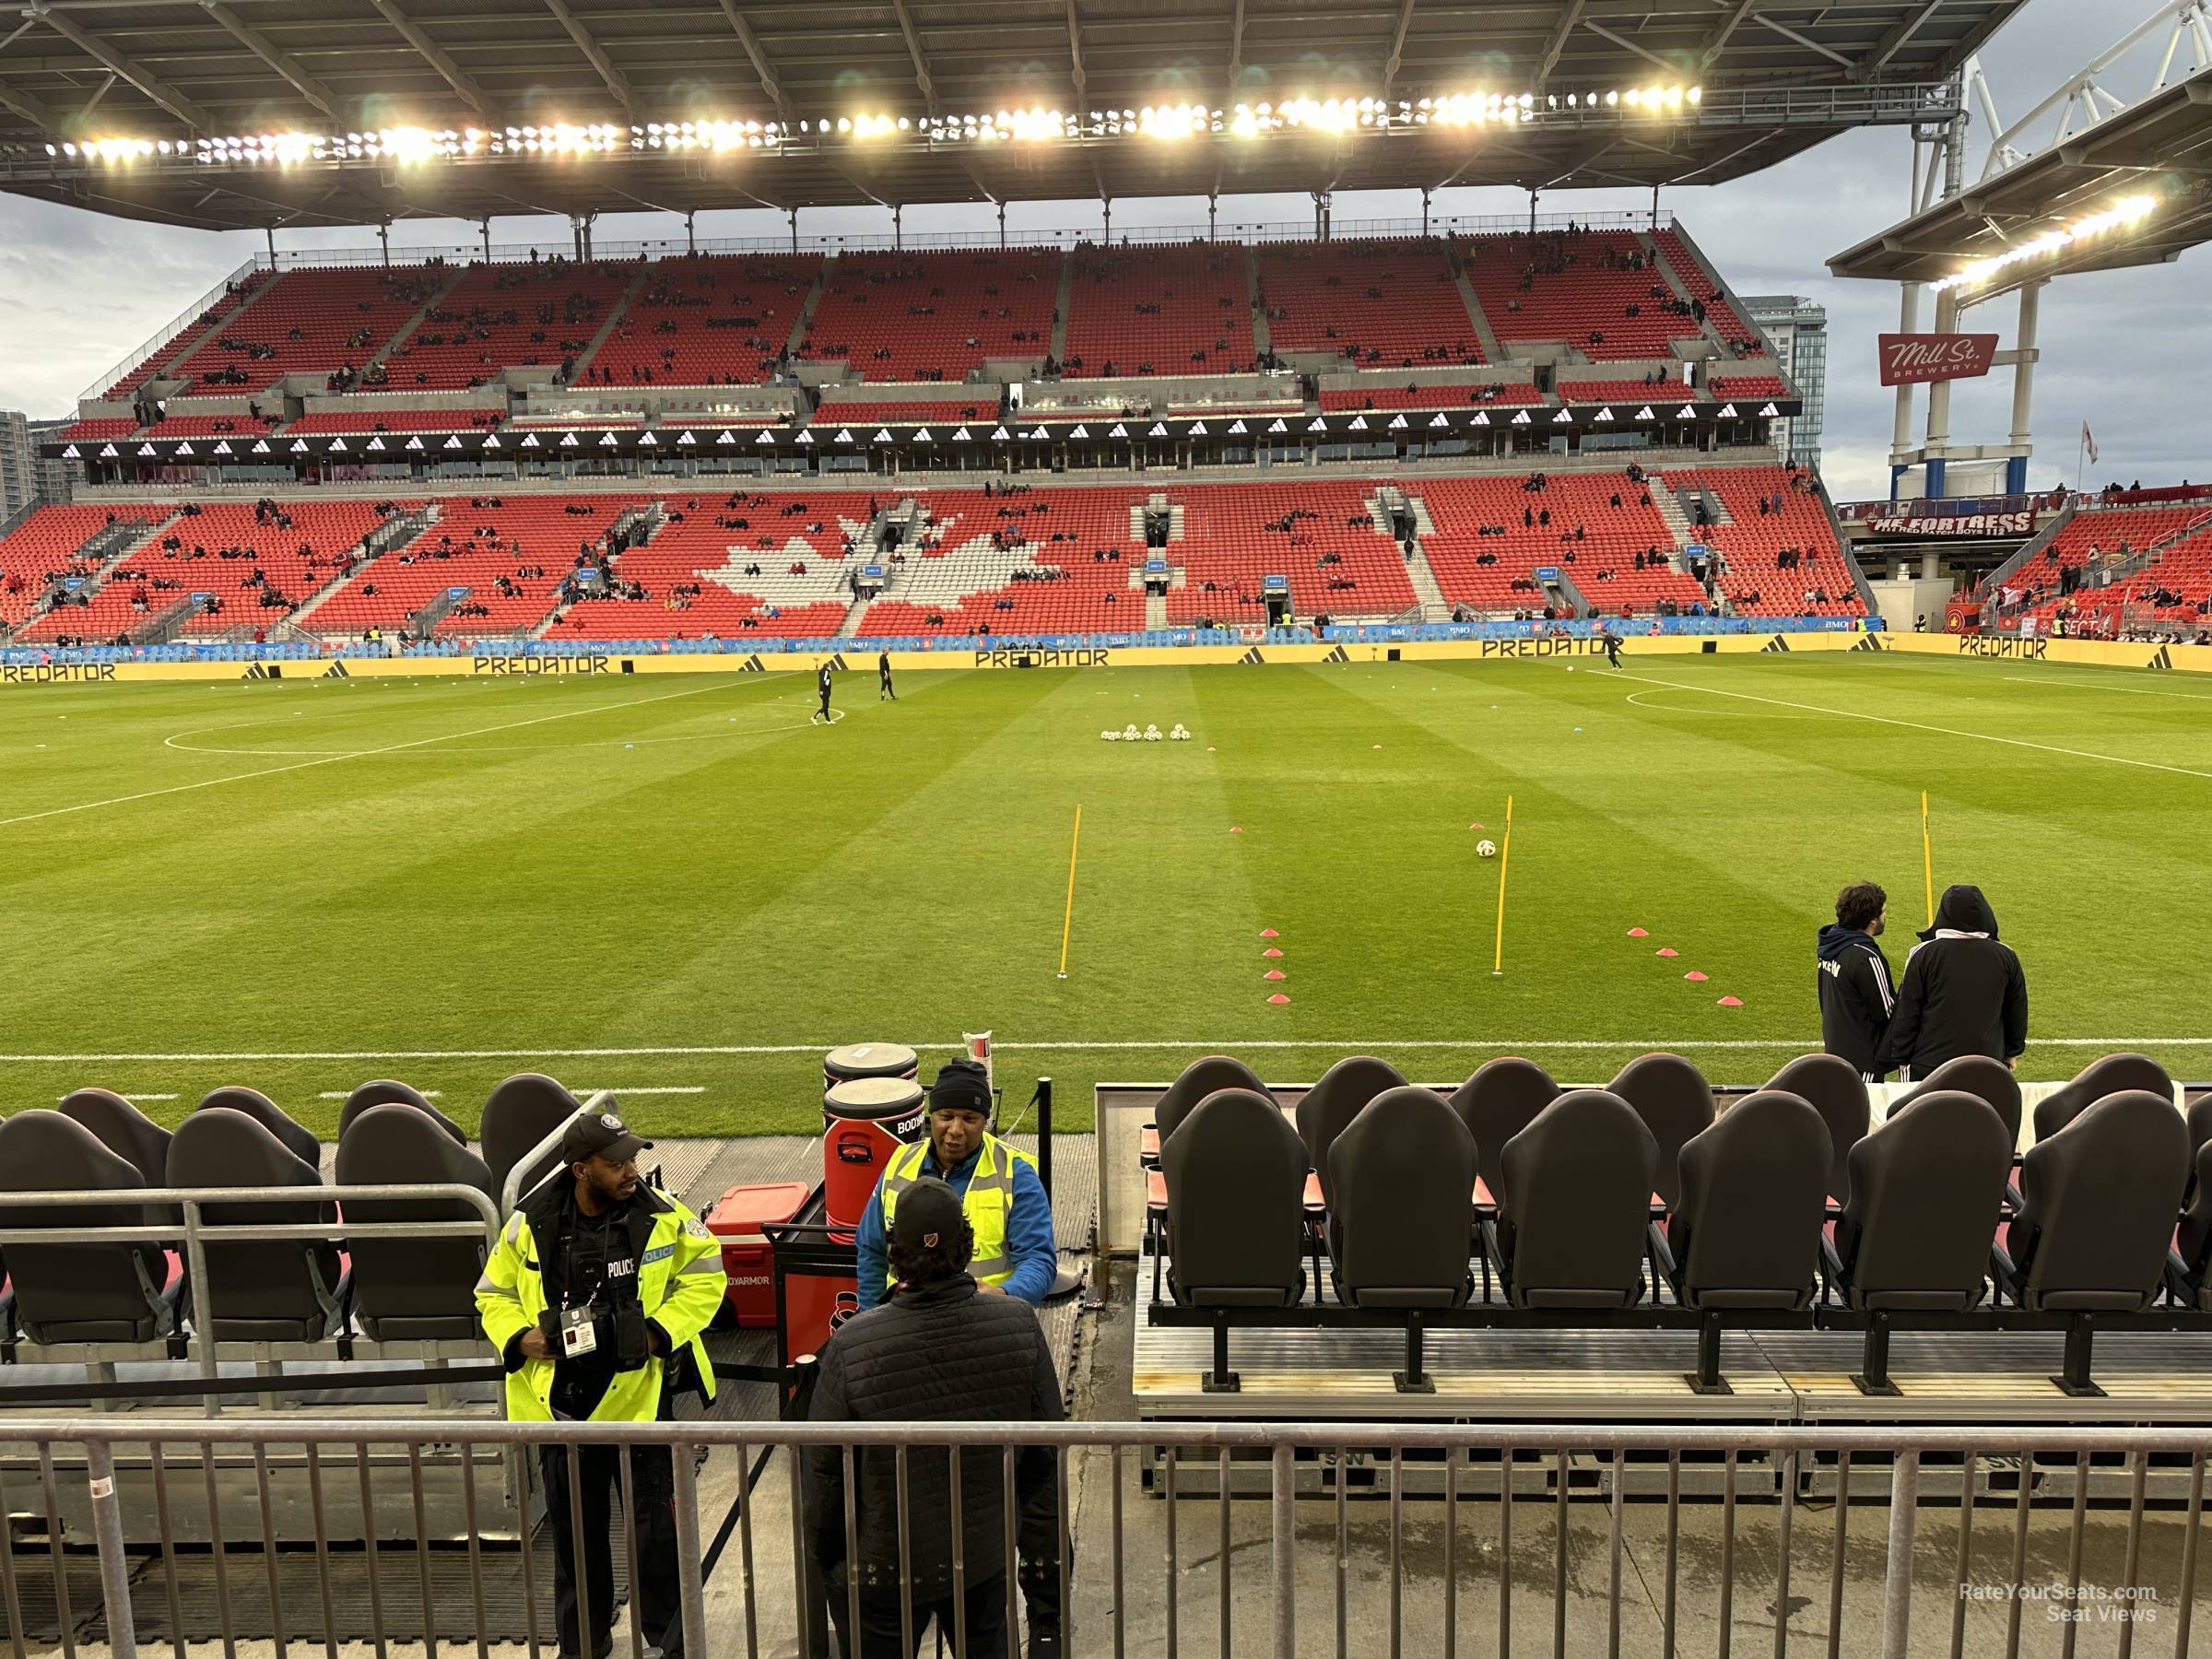 section 122, row 5 seat view  - bmo field